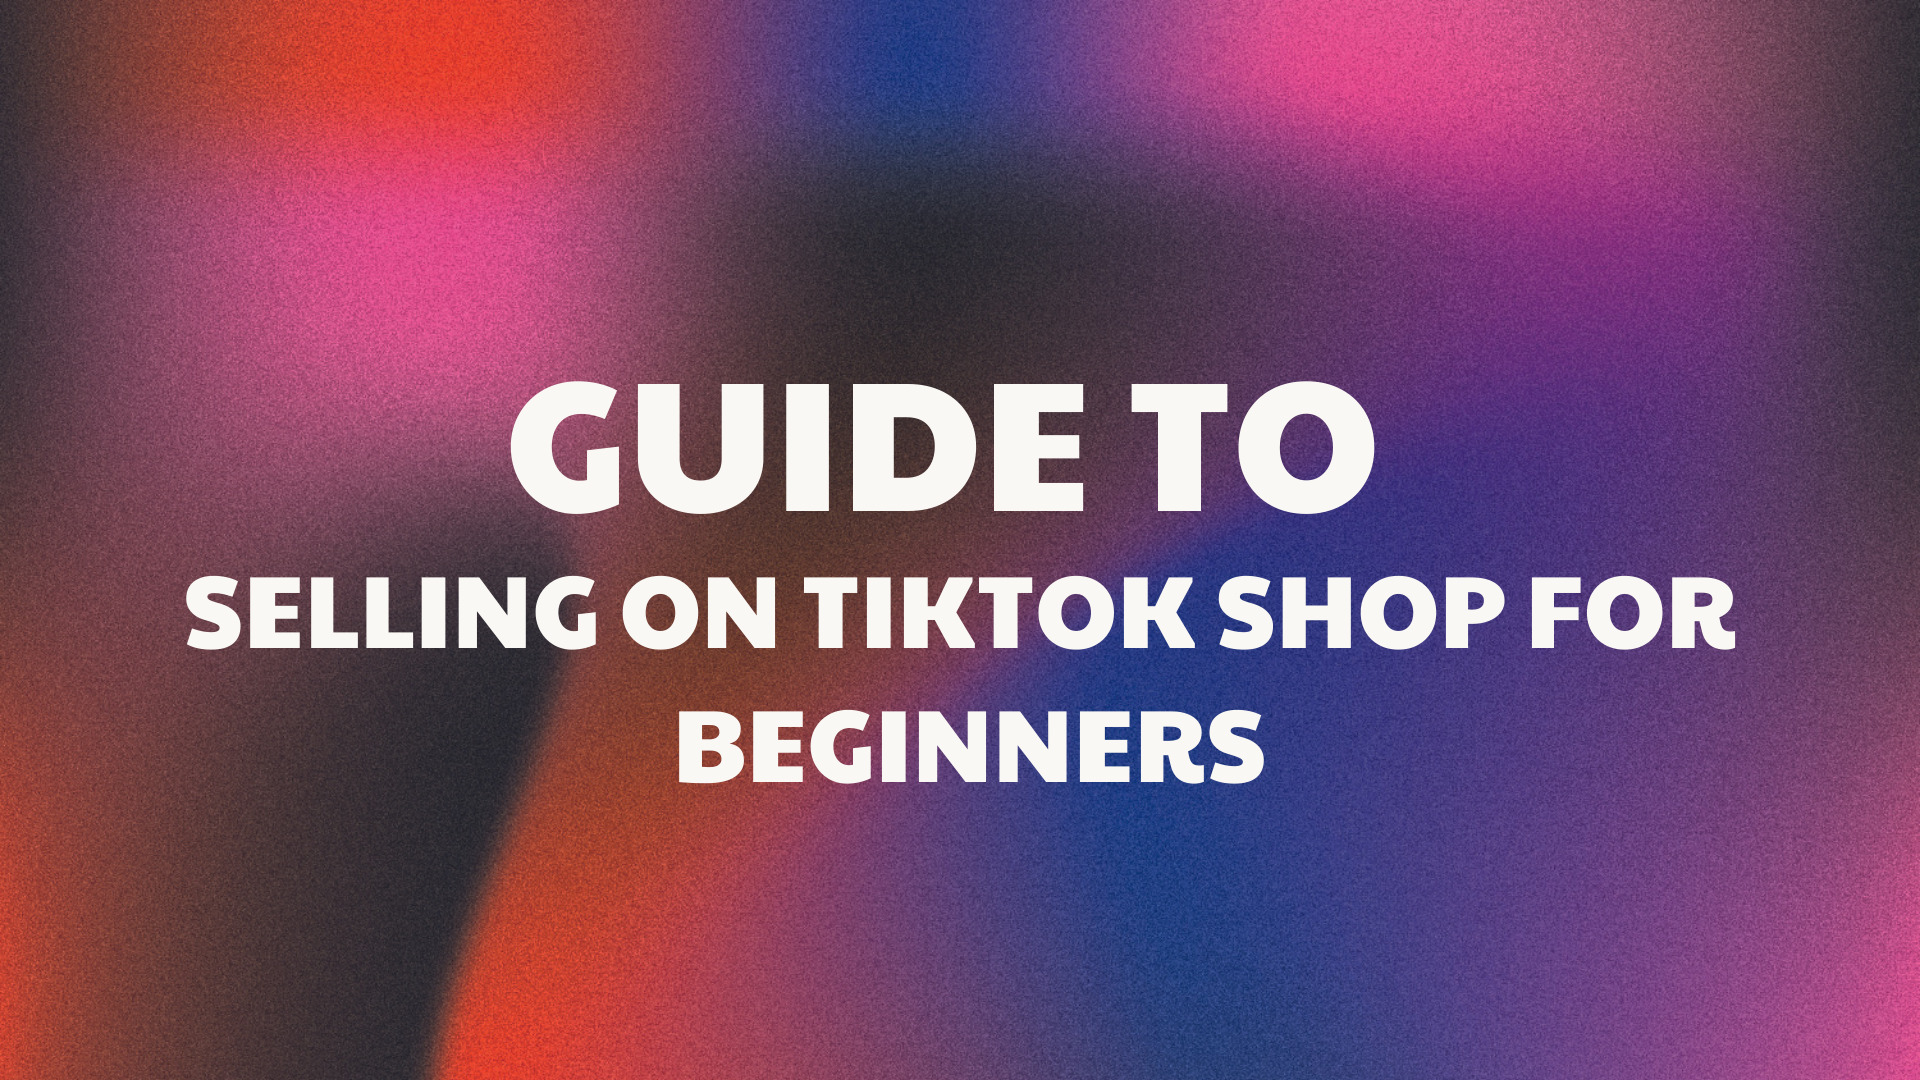 Guide to Selling on TikTok Shop For Beginners